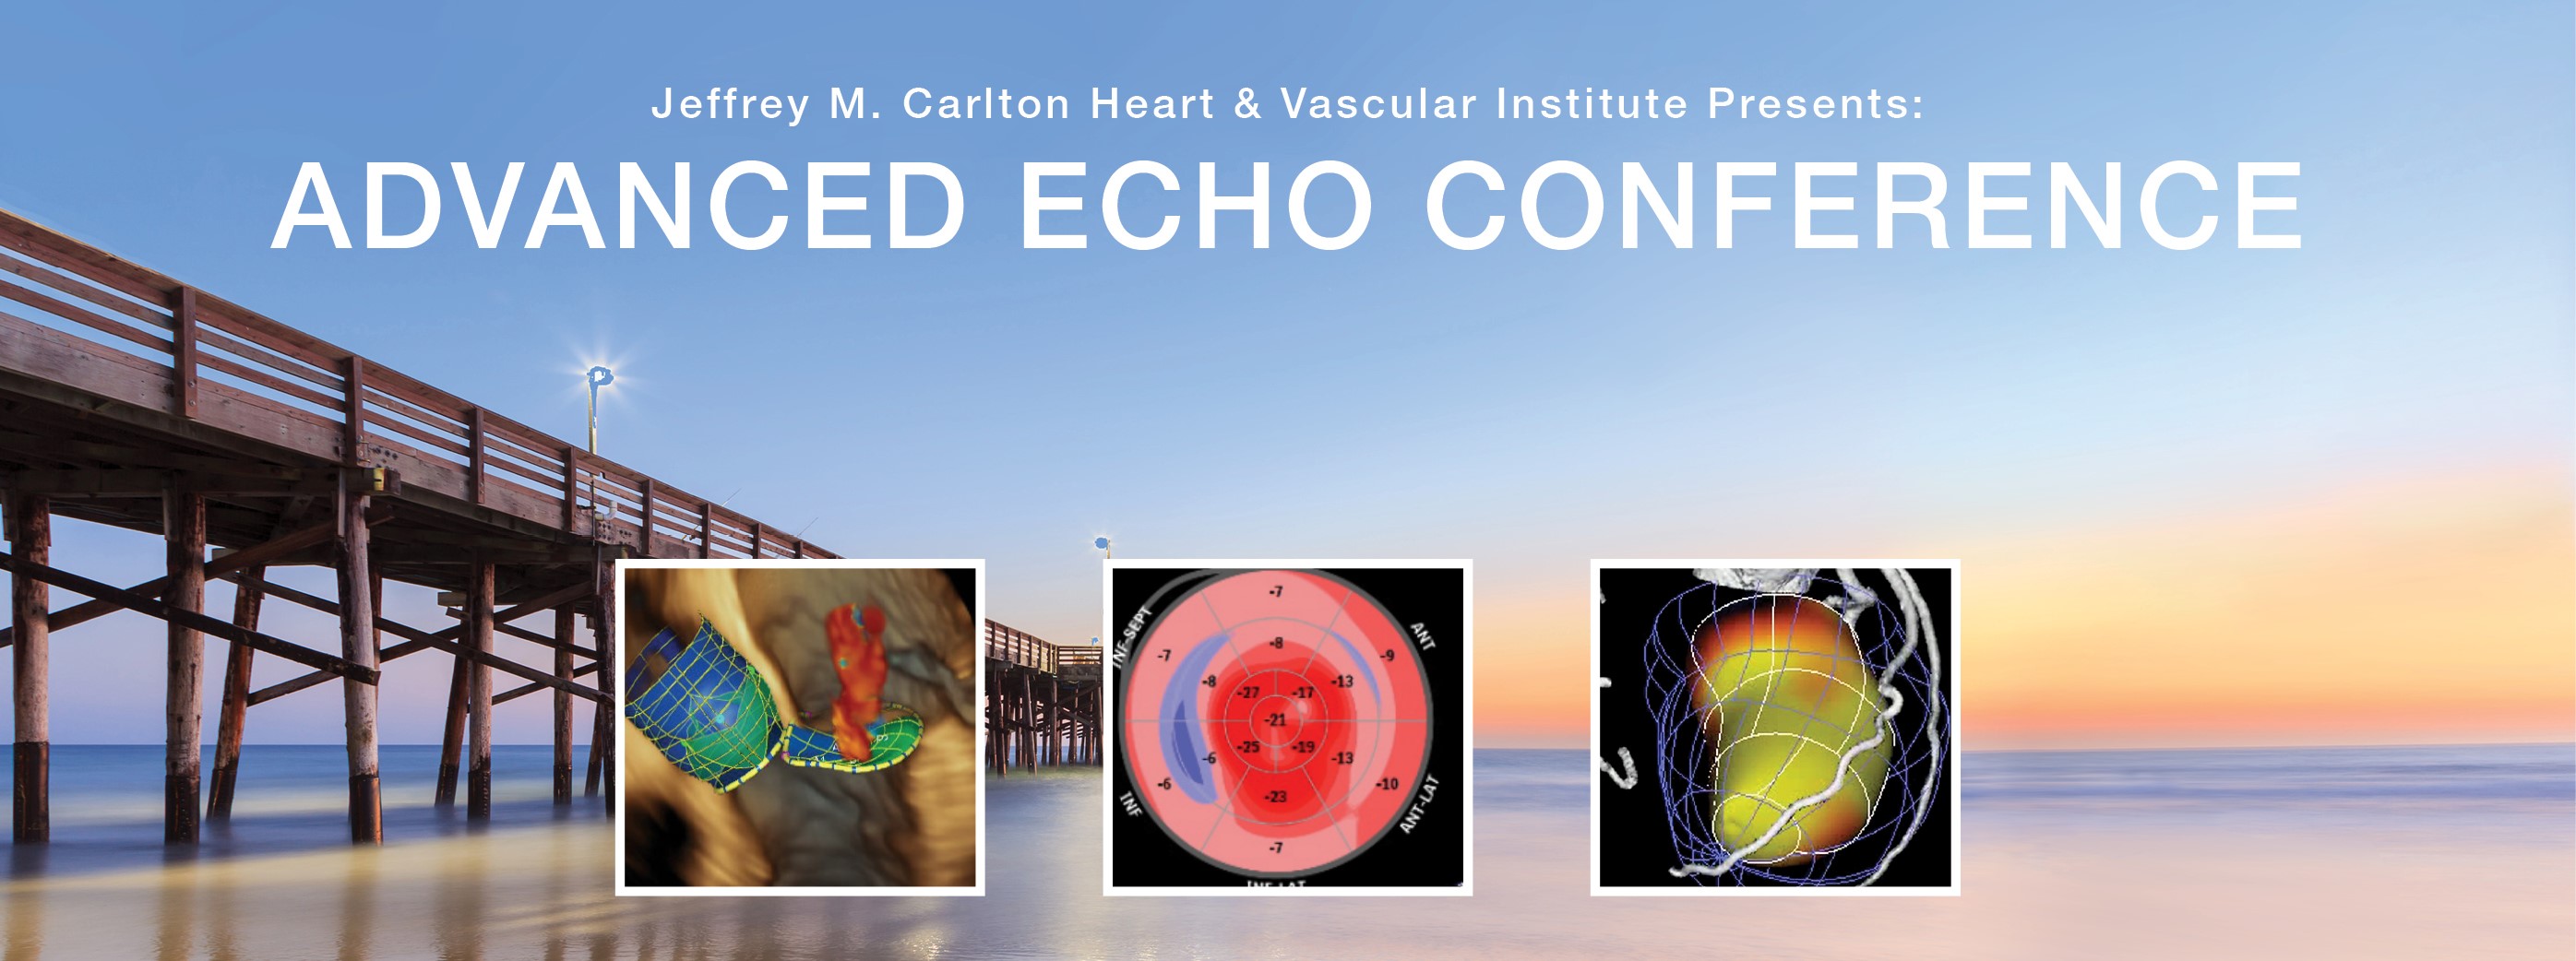 37th Advanced Echo Conference Hoag Continuing Medical Education